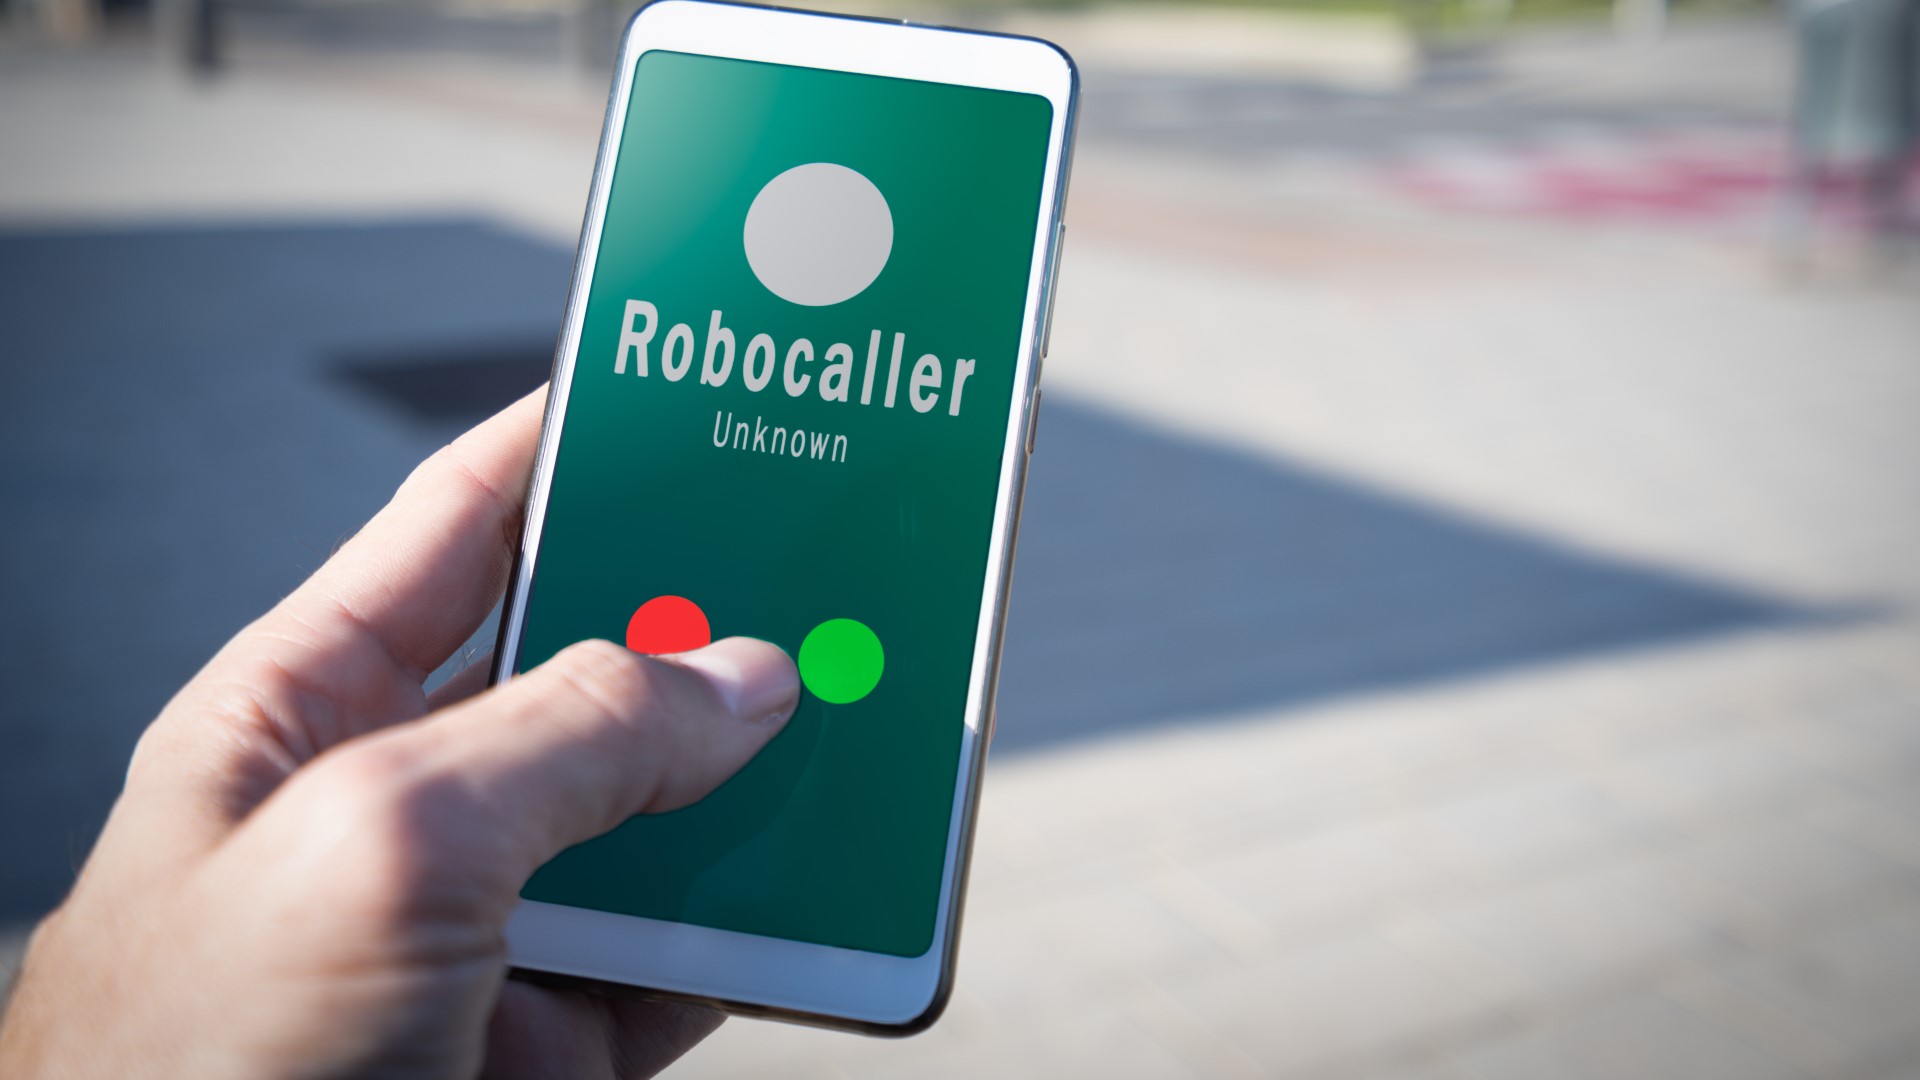 Leaders say you are probably still getting the occasional call, but 33 billion robocalls have been blocked in North Carolina since 2019.